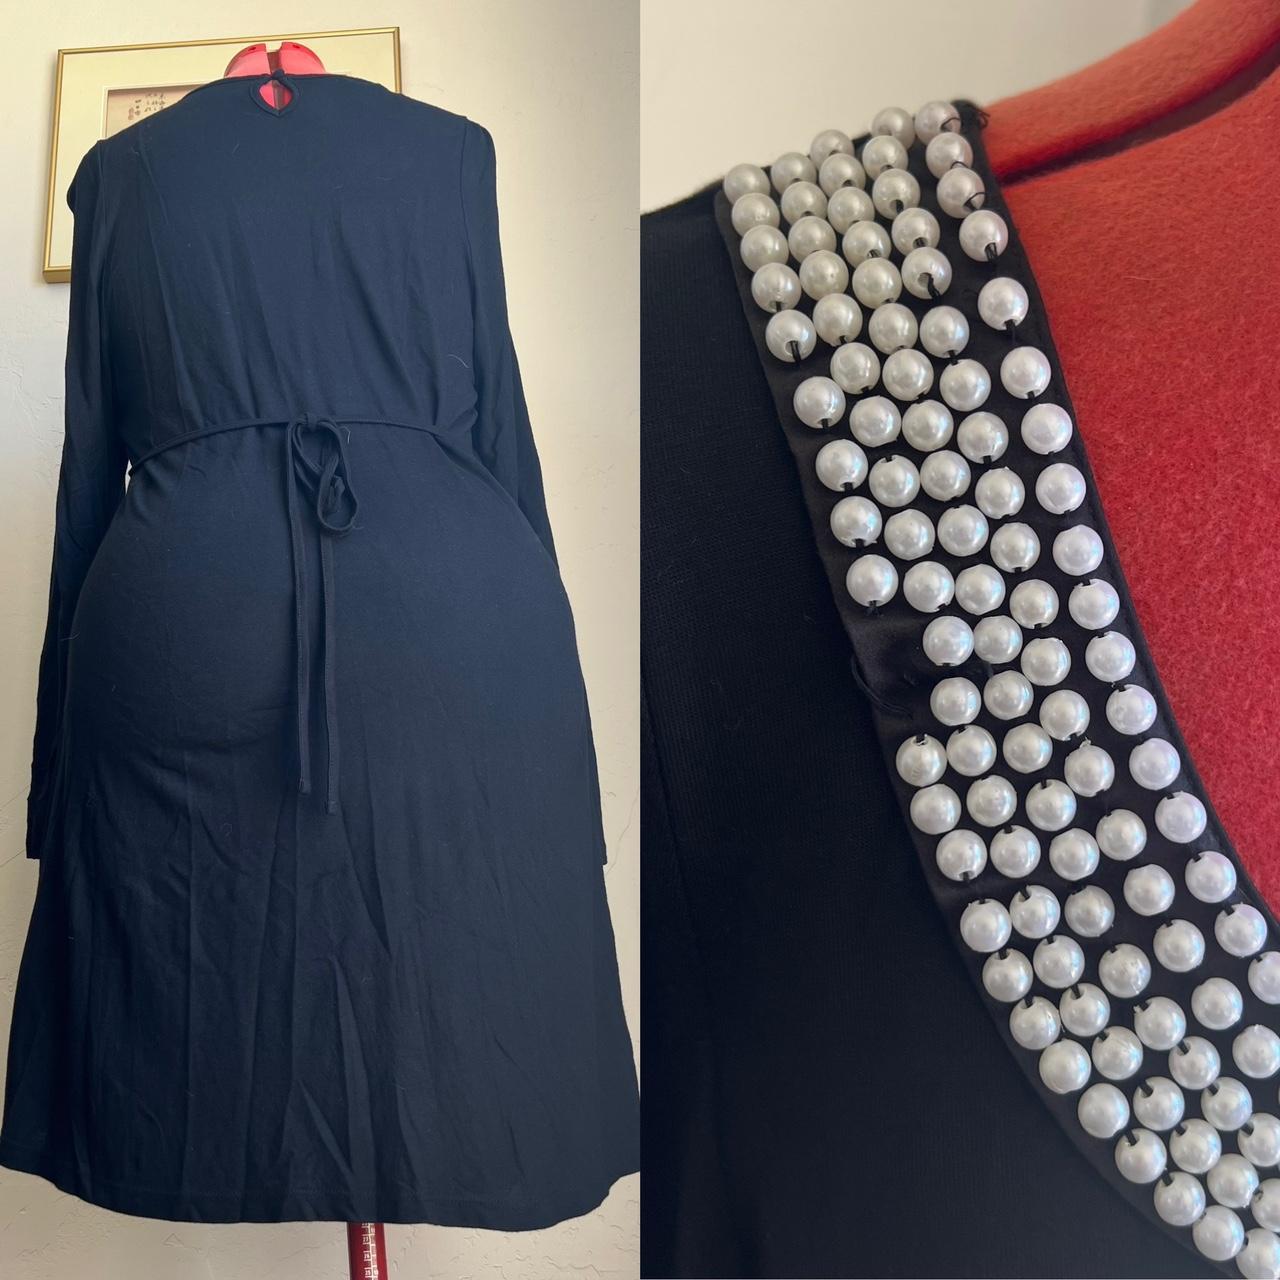 Product Image 4 - ❕pearl collar fancy black dress❕

such